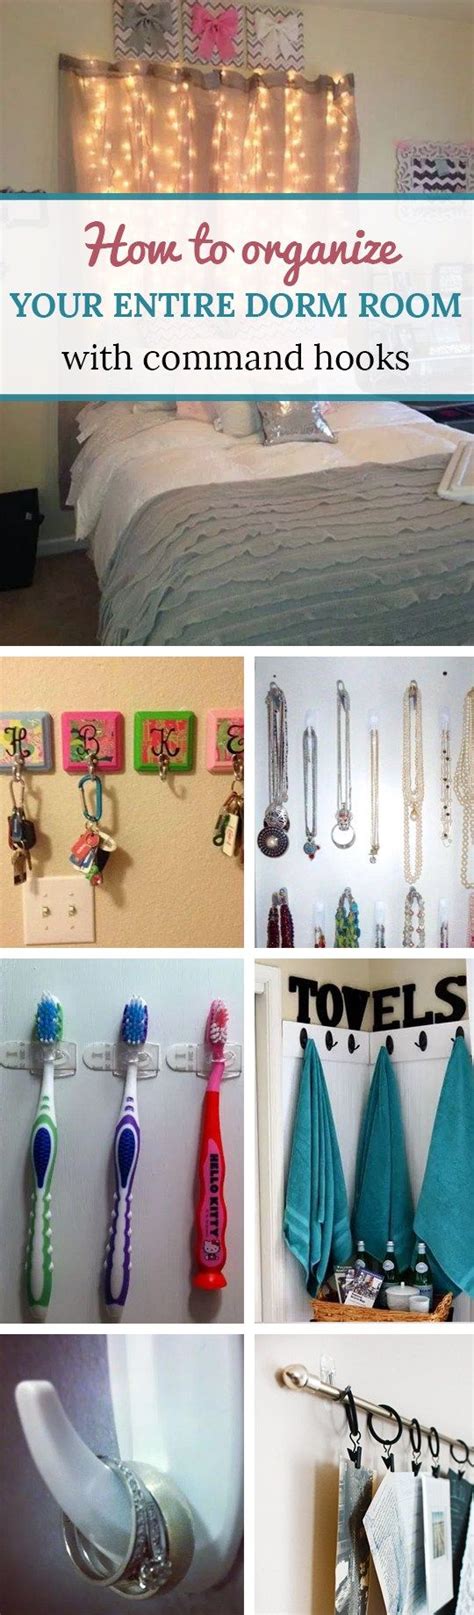 how to organize your entire dorm room with command hooks society19 dorm organization dorm